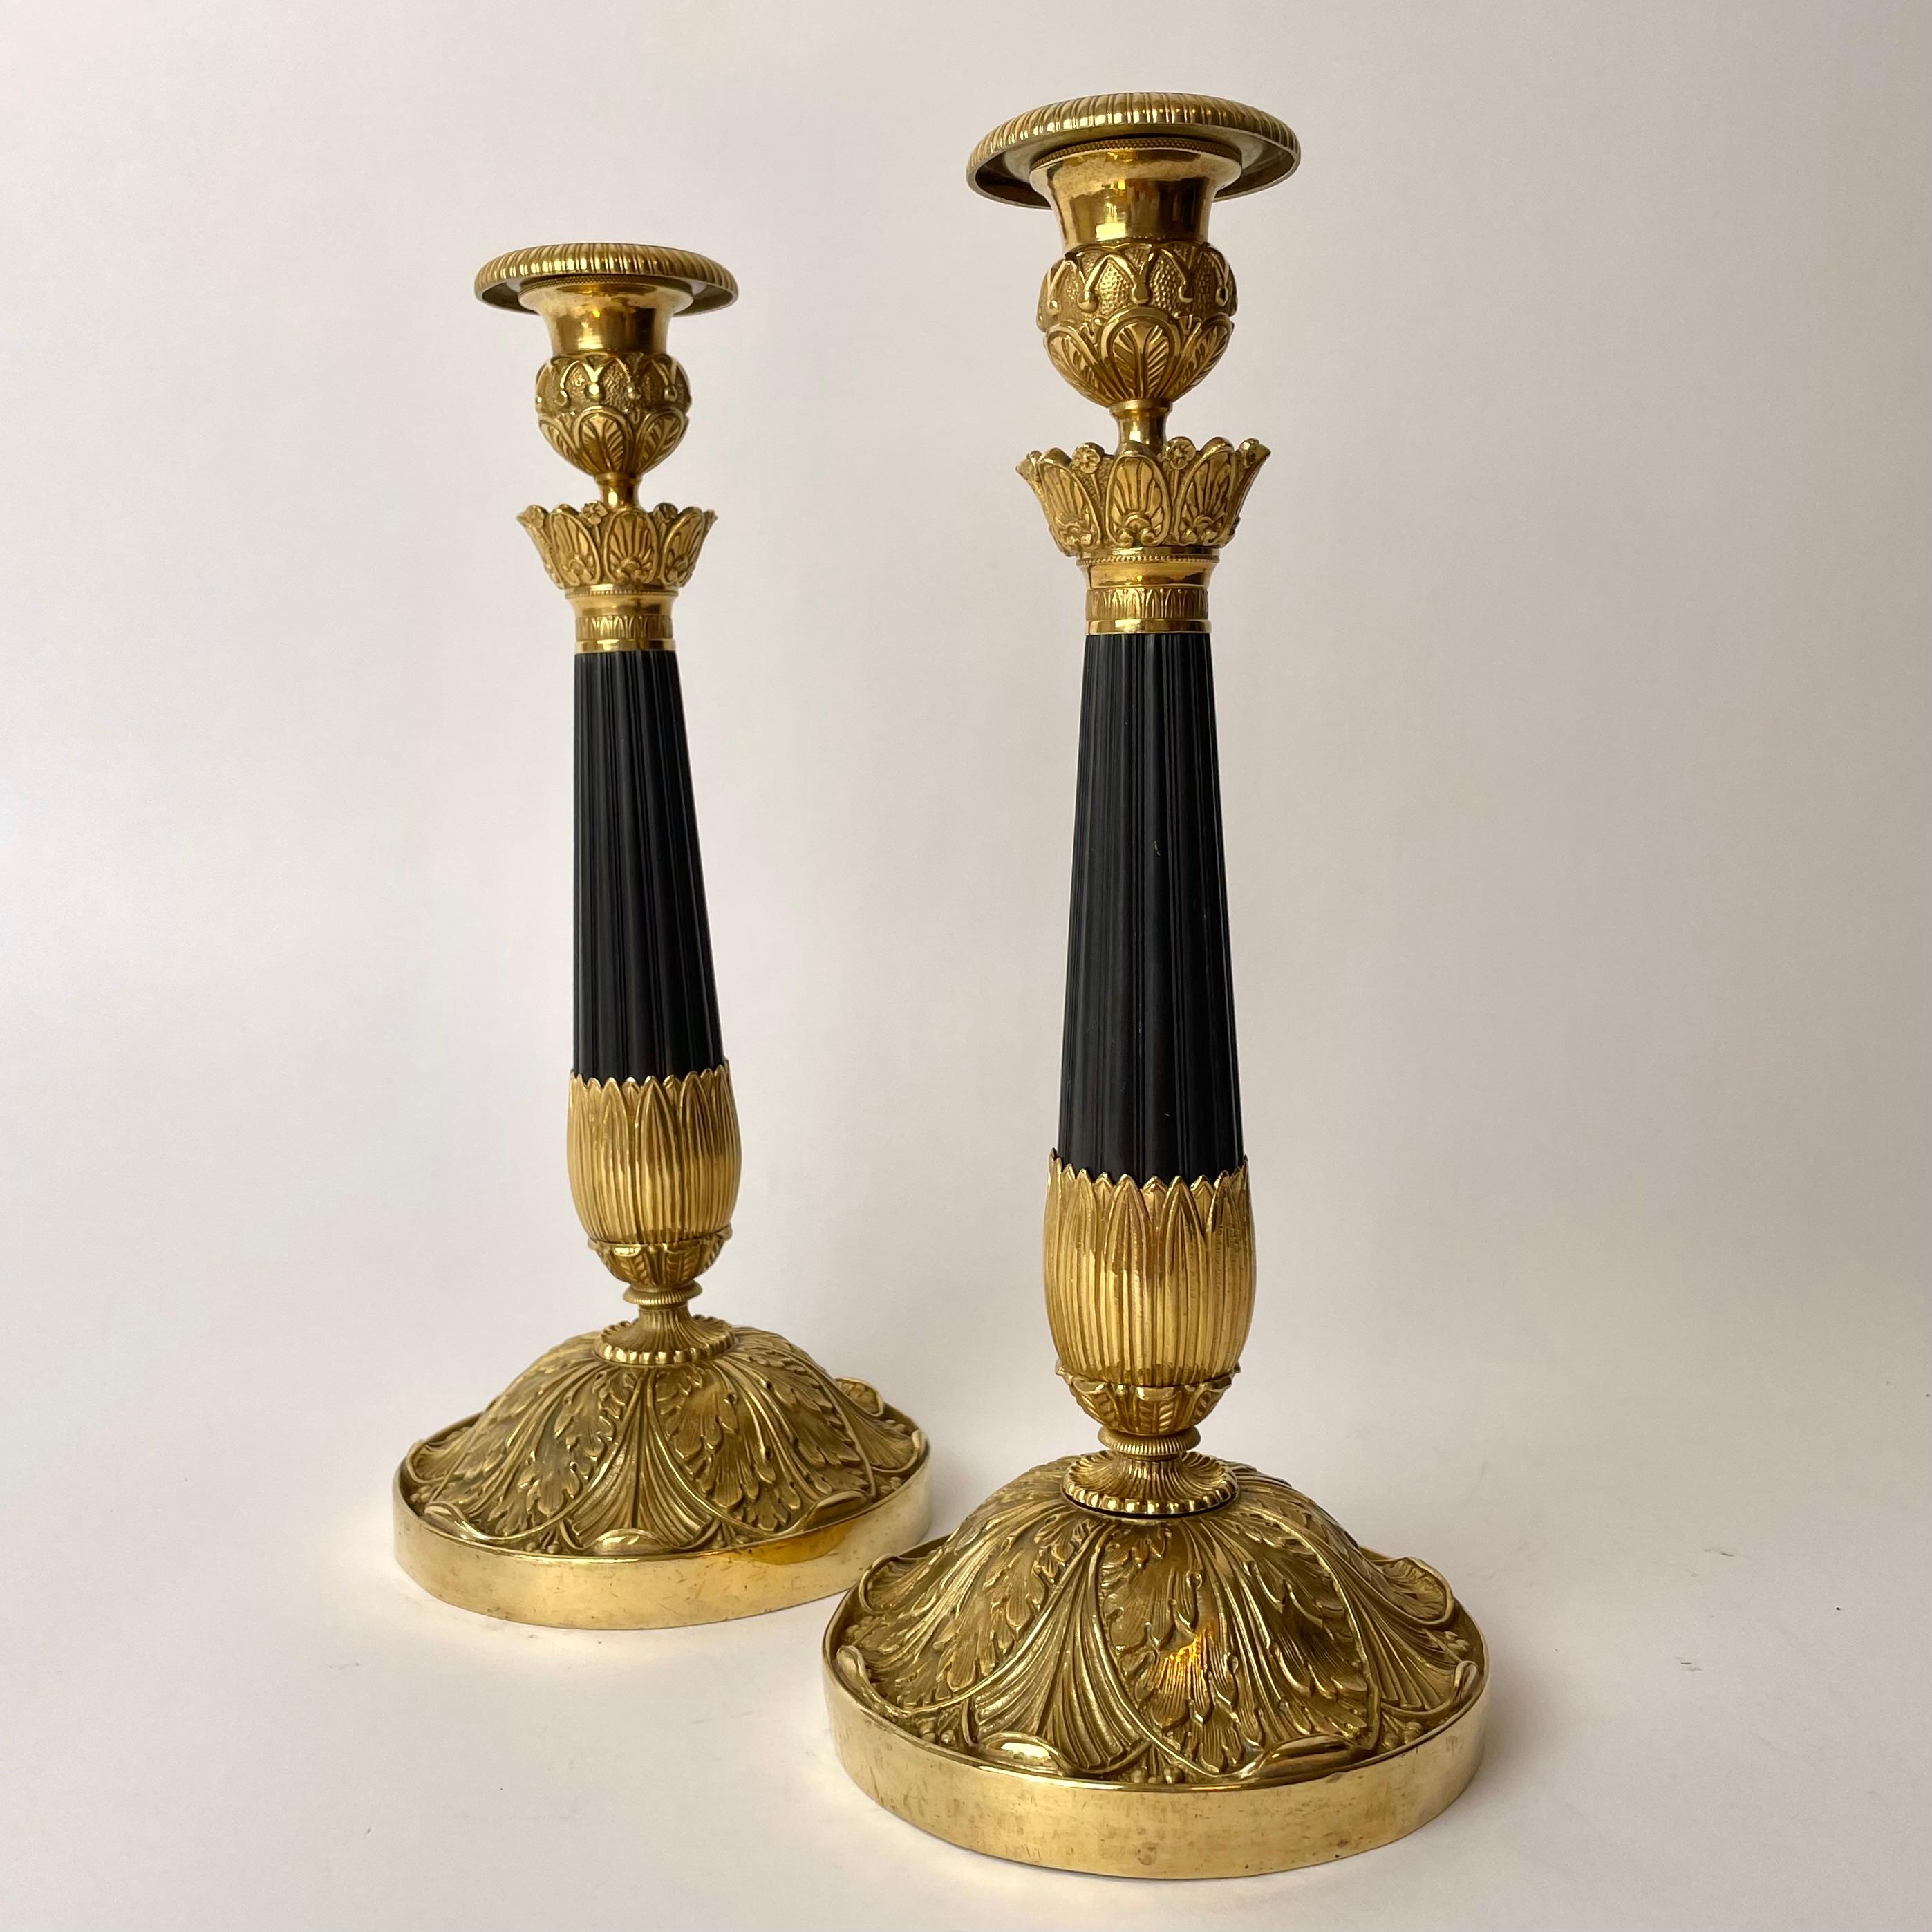 French Pair of Empire Candlesticks, Gilded and Patinated Bronze, Early 19th Century For Sale